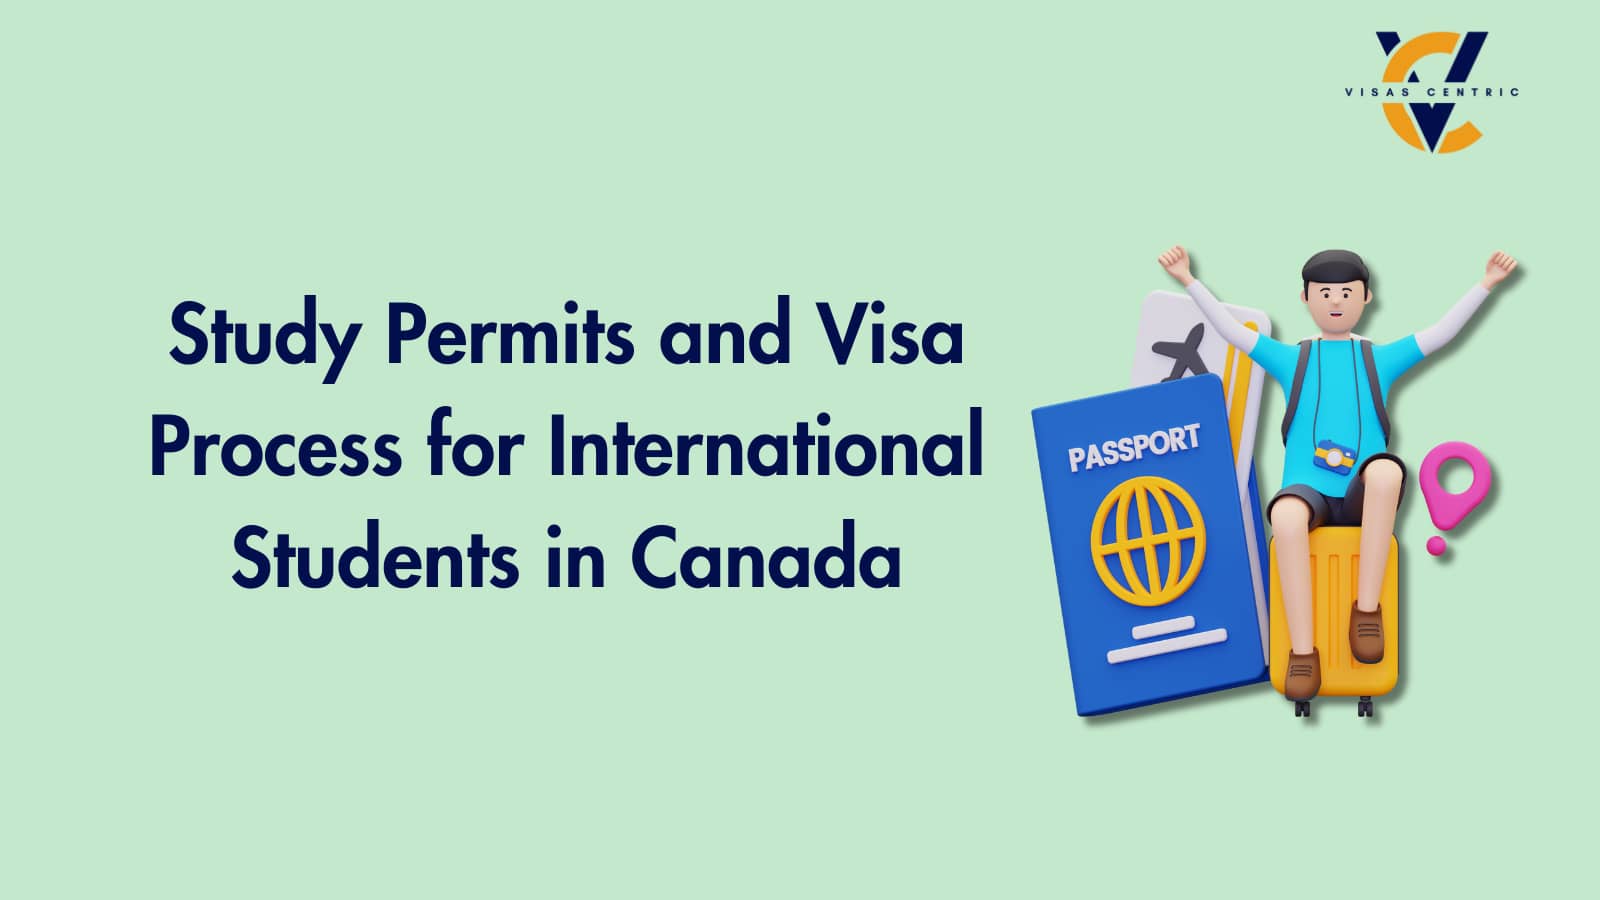 Understanding Study Permits and Visa Process for International Students in Canada